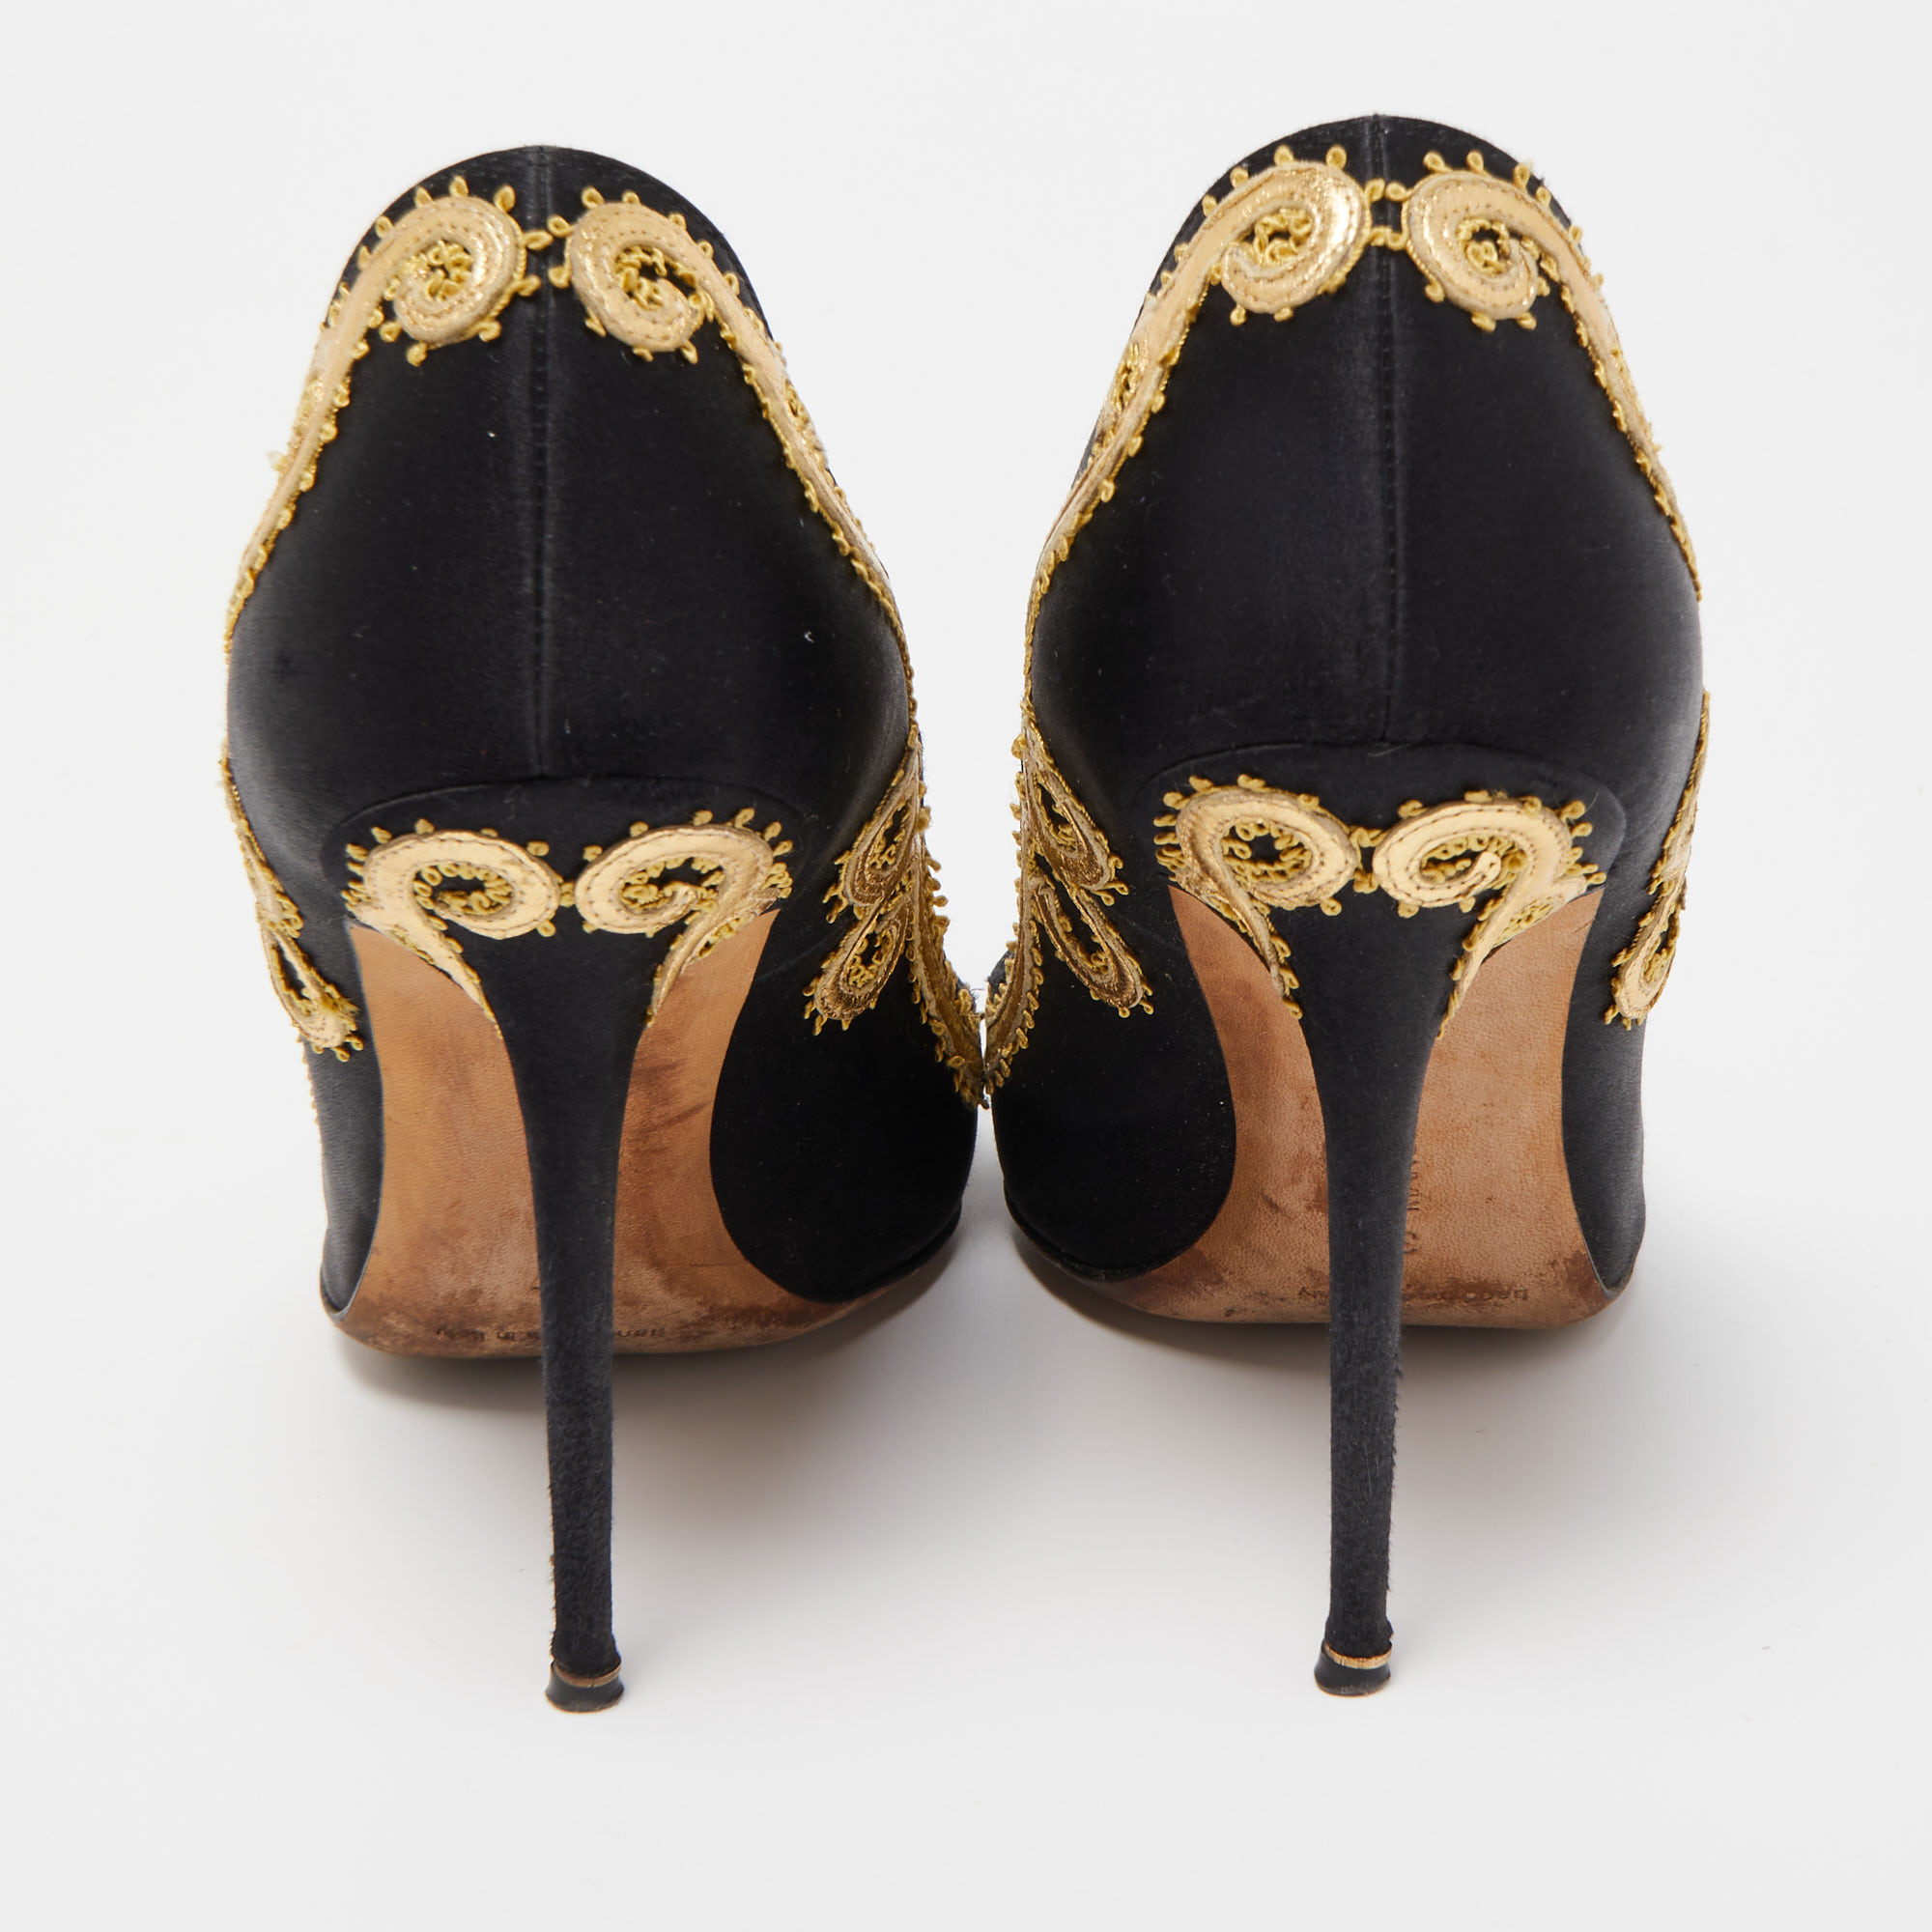 Manolo Blahnik Black/Gold Satin And Leather Embroidered Pumps Size 37